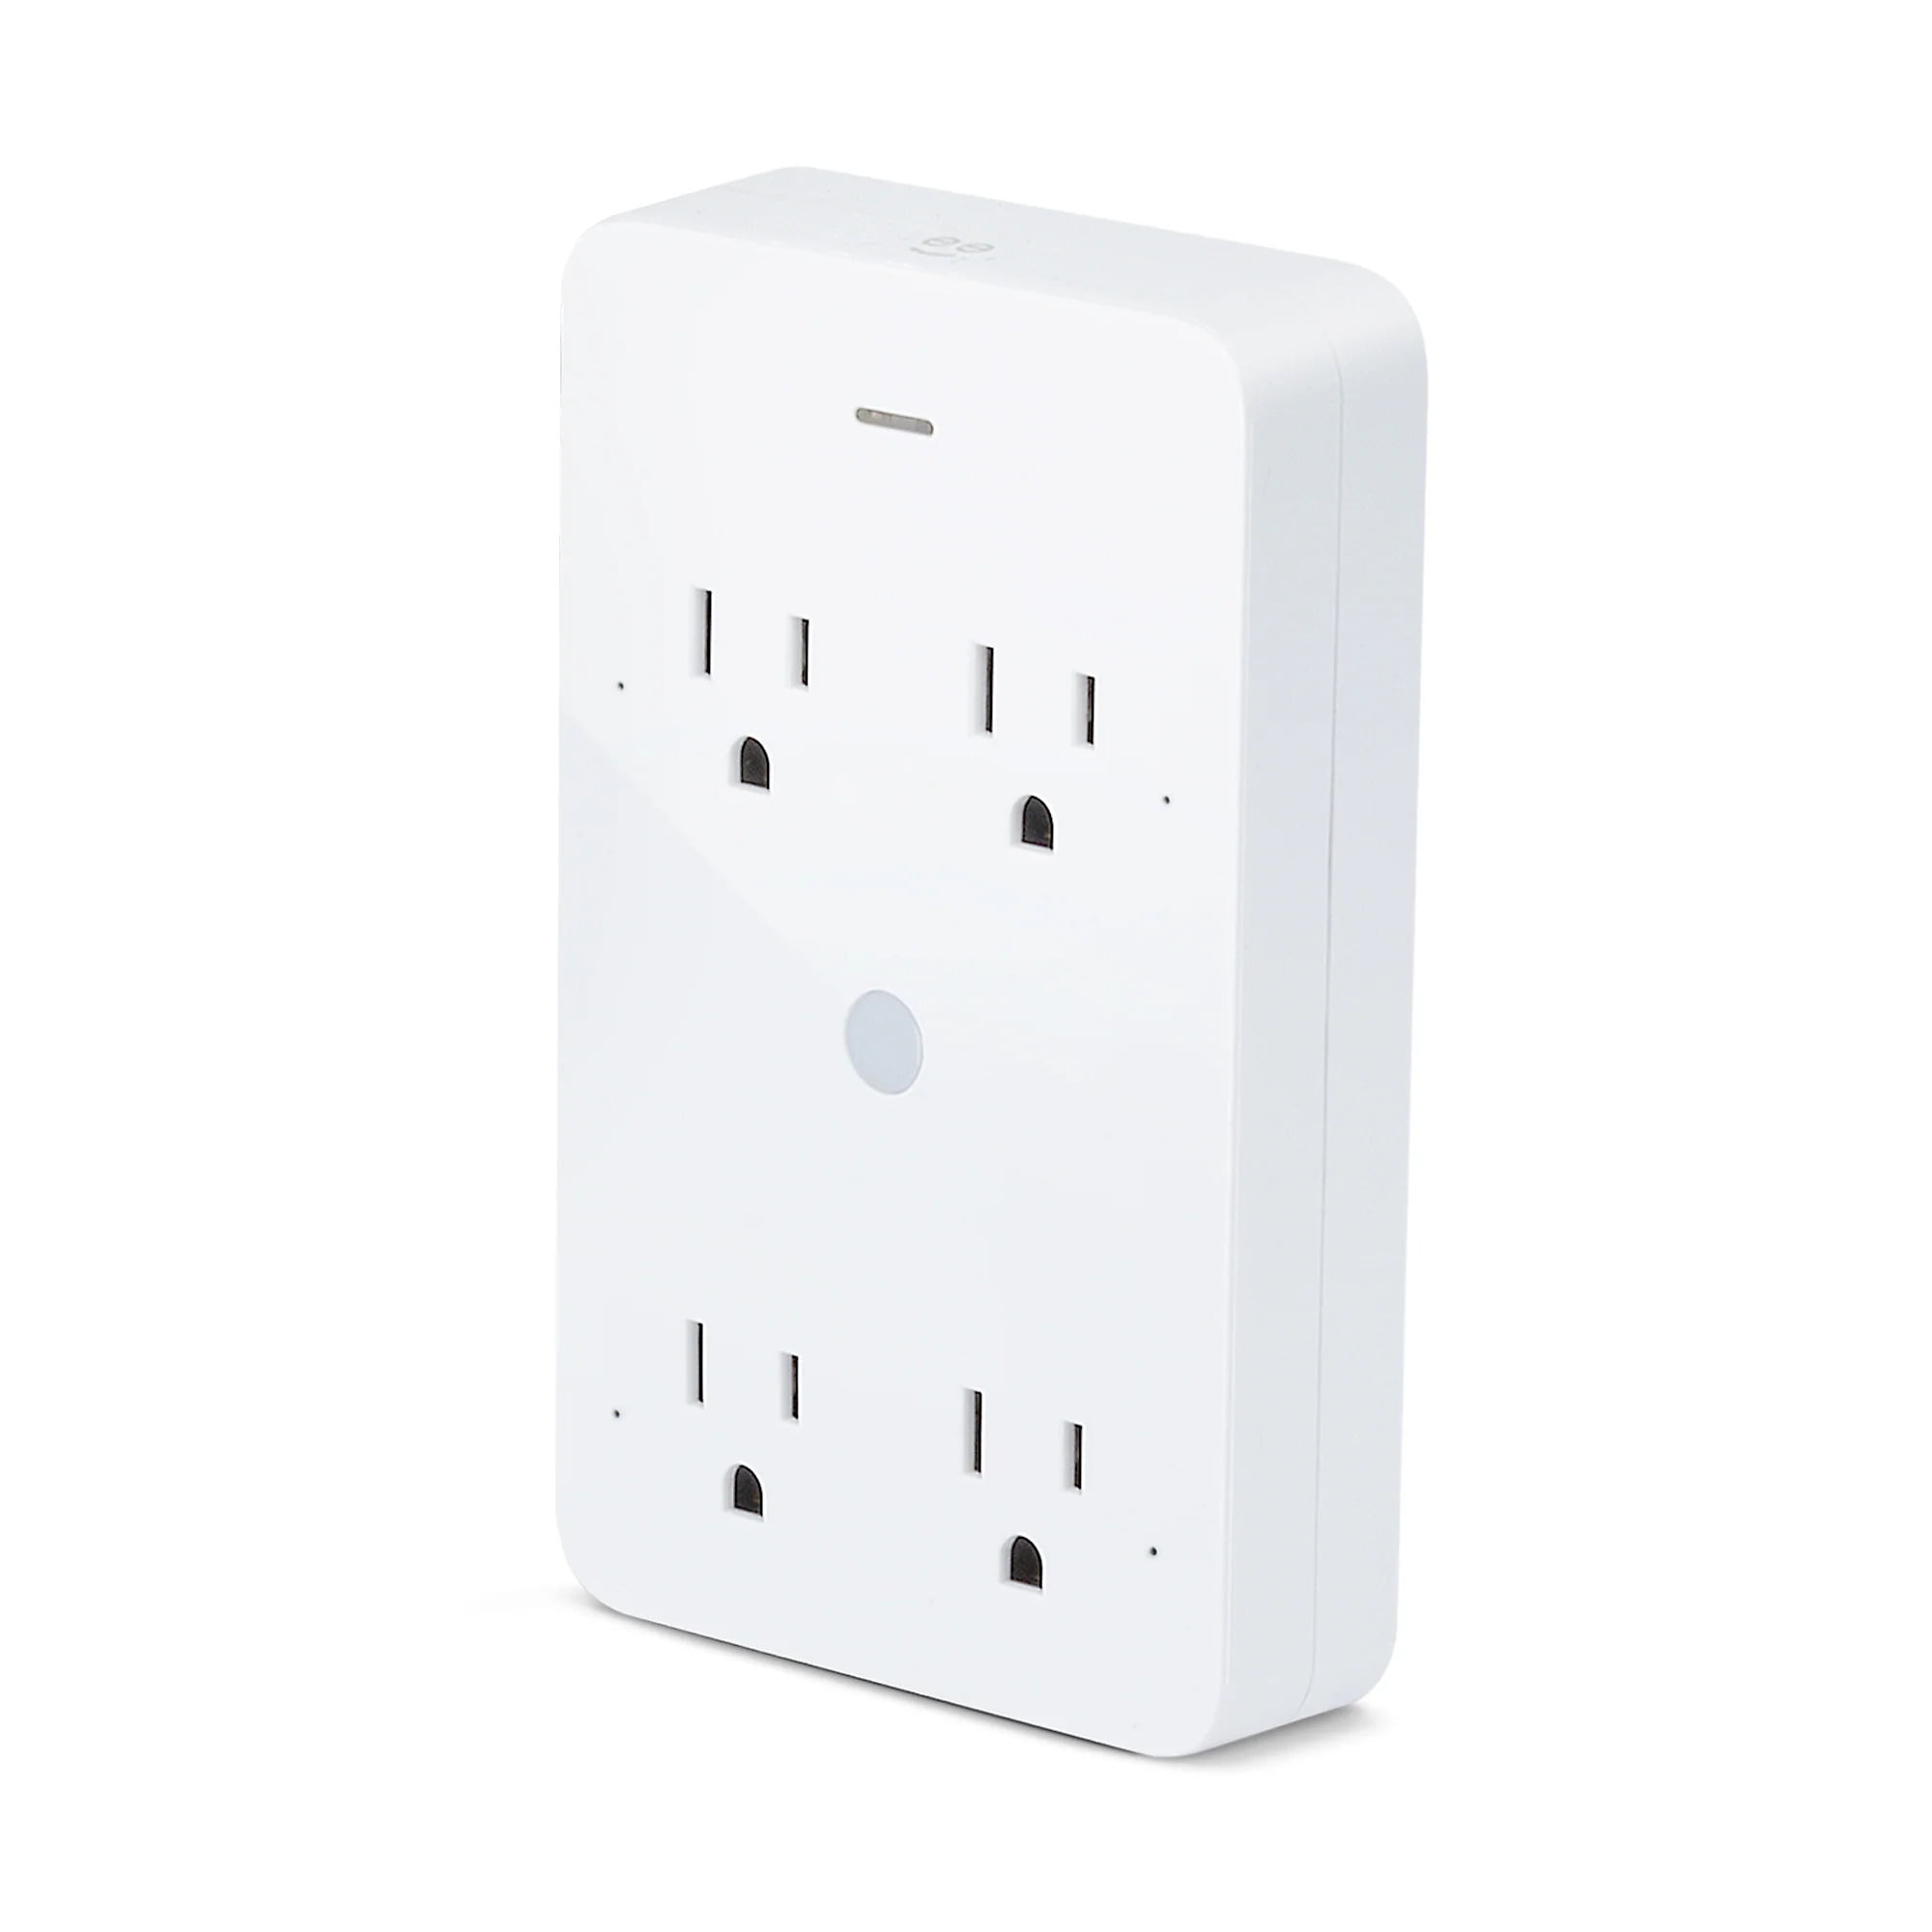 Geeni 15 Amp 125-V 2-Outlet Tamper Resistant In-Wall Smart Wi-Fi Receptacle  Works with Alexa, Google Assistant, White (1-Pack) GN-WW115-199 - The Home  Depot